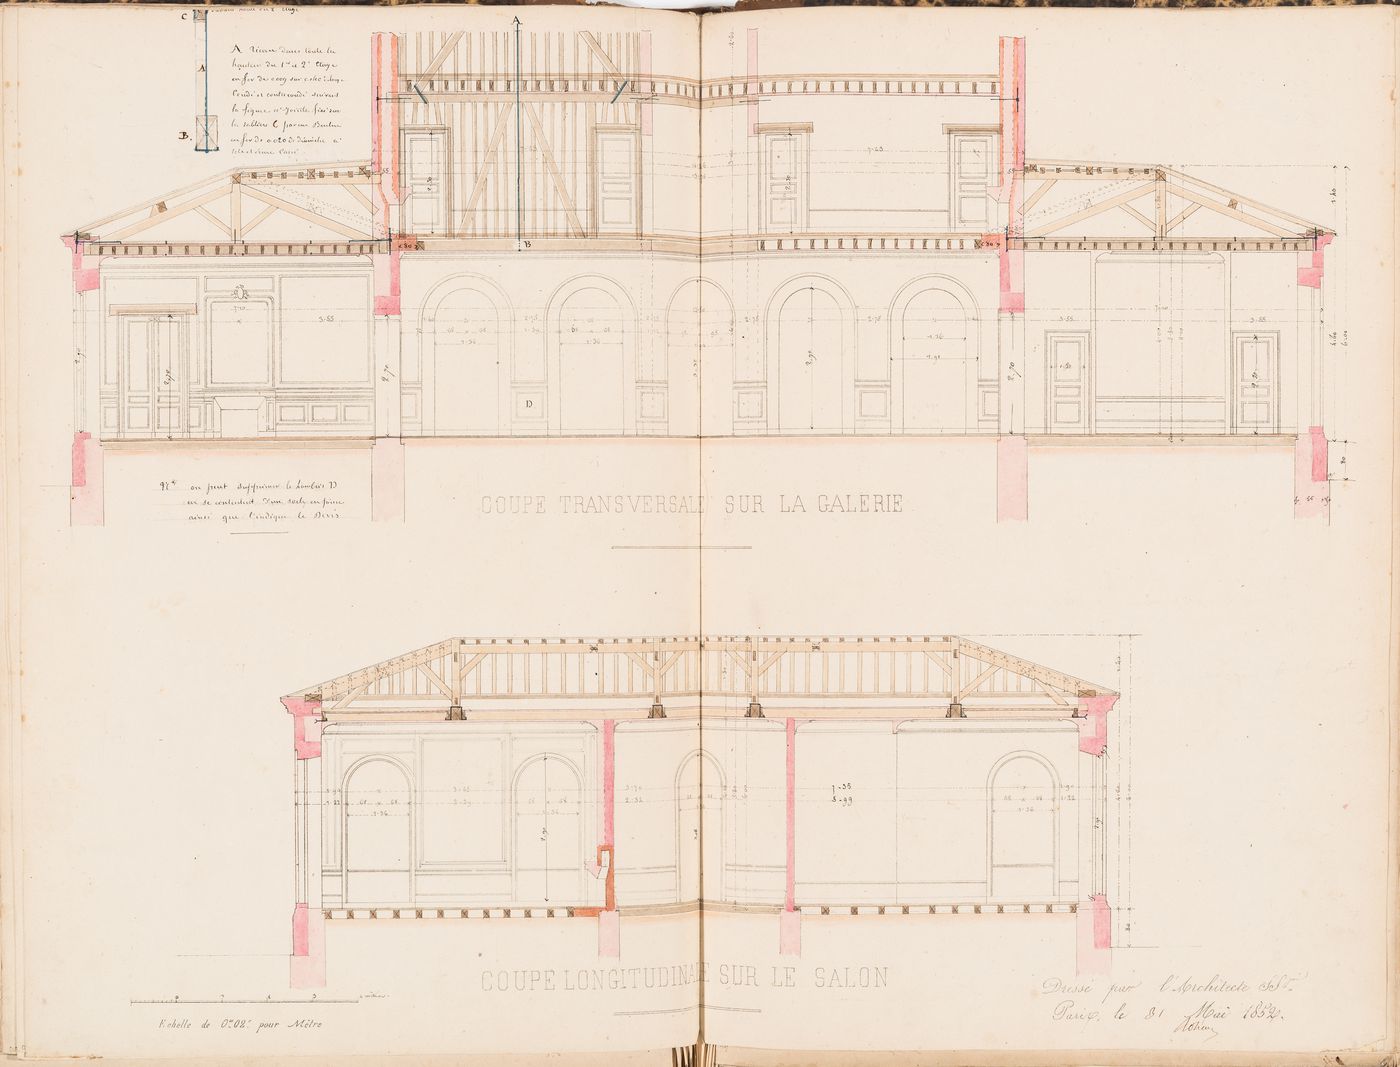 Cross section through the gallery and longitudinal section through the salon, both showing the wood framing for a country house for Madame de Lescure, Royan